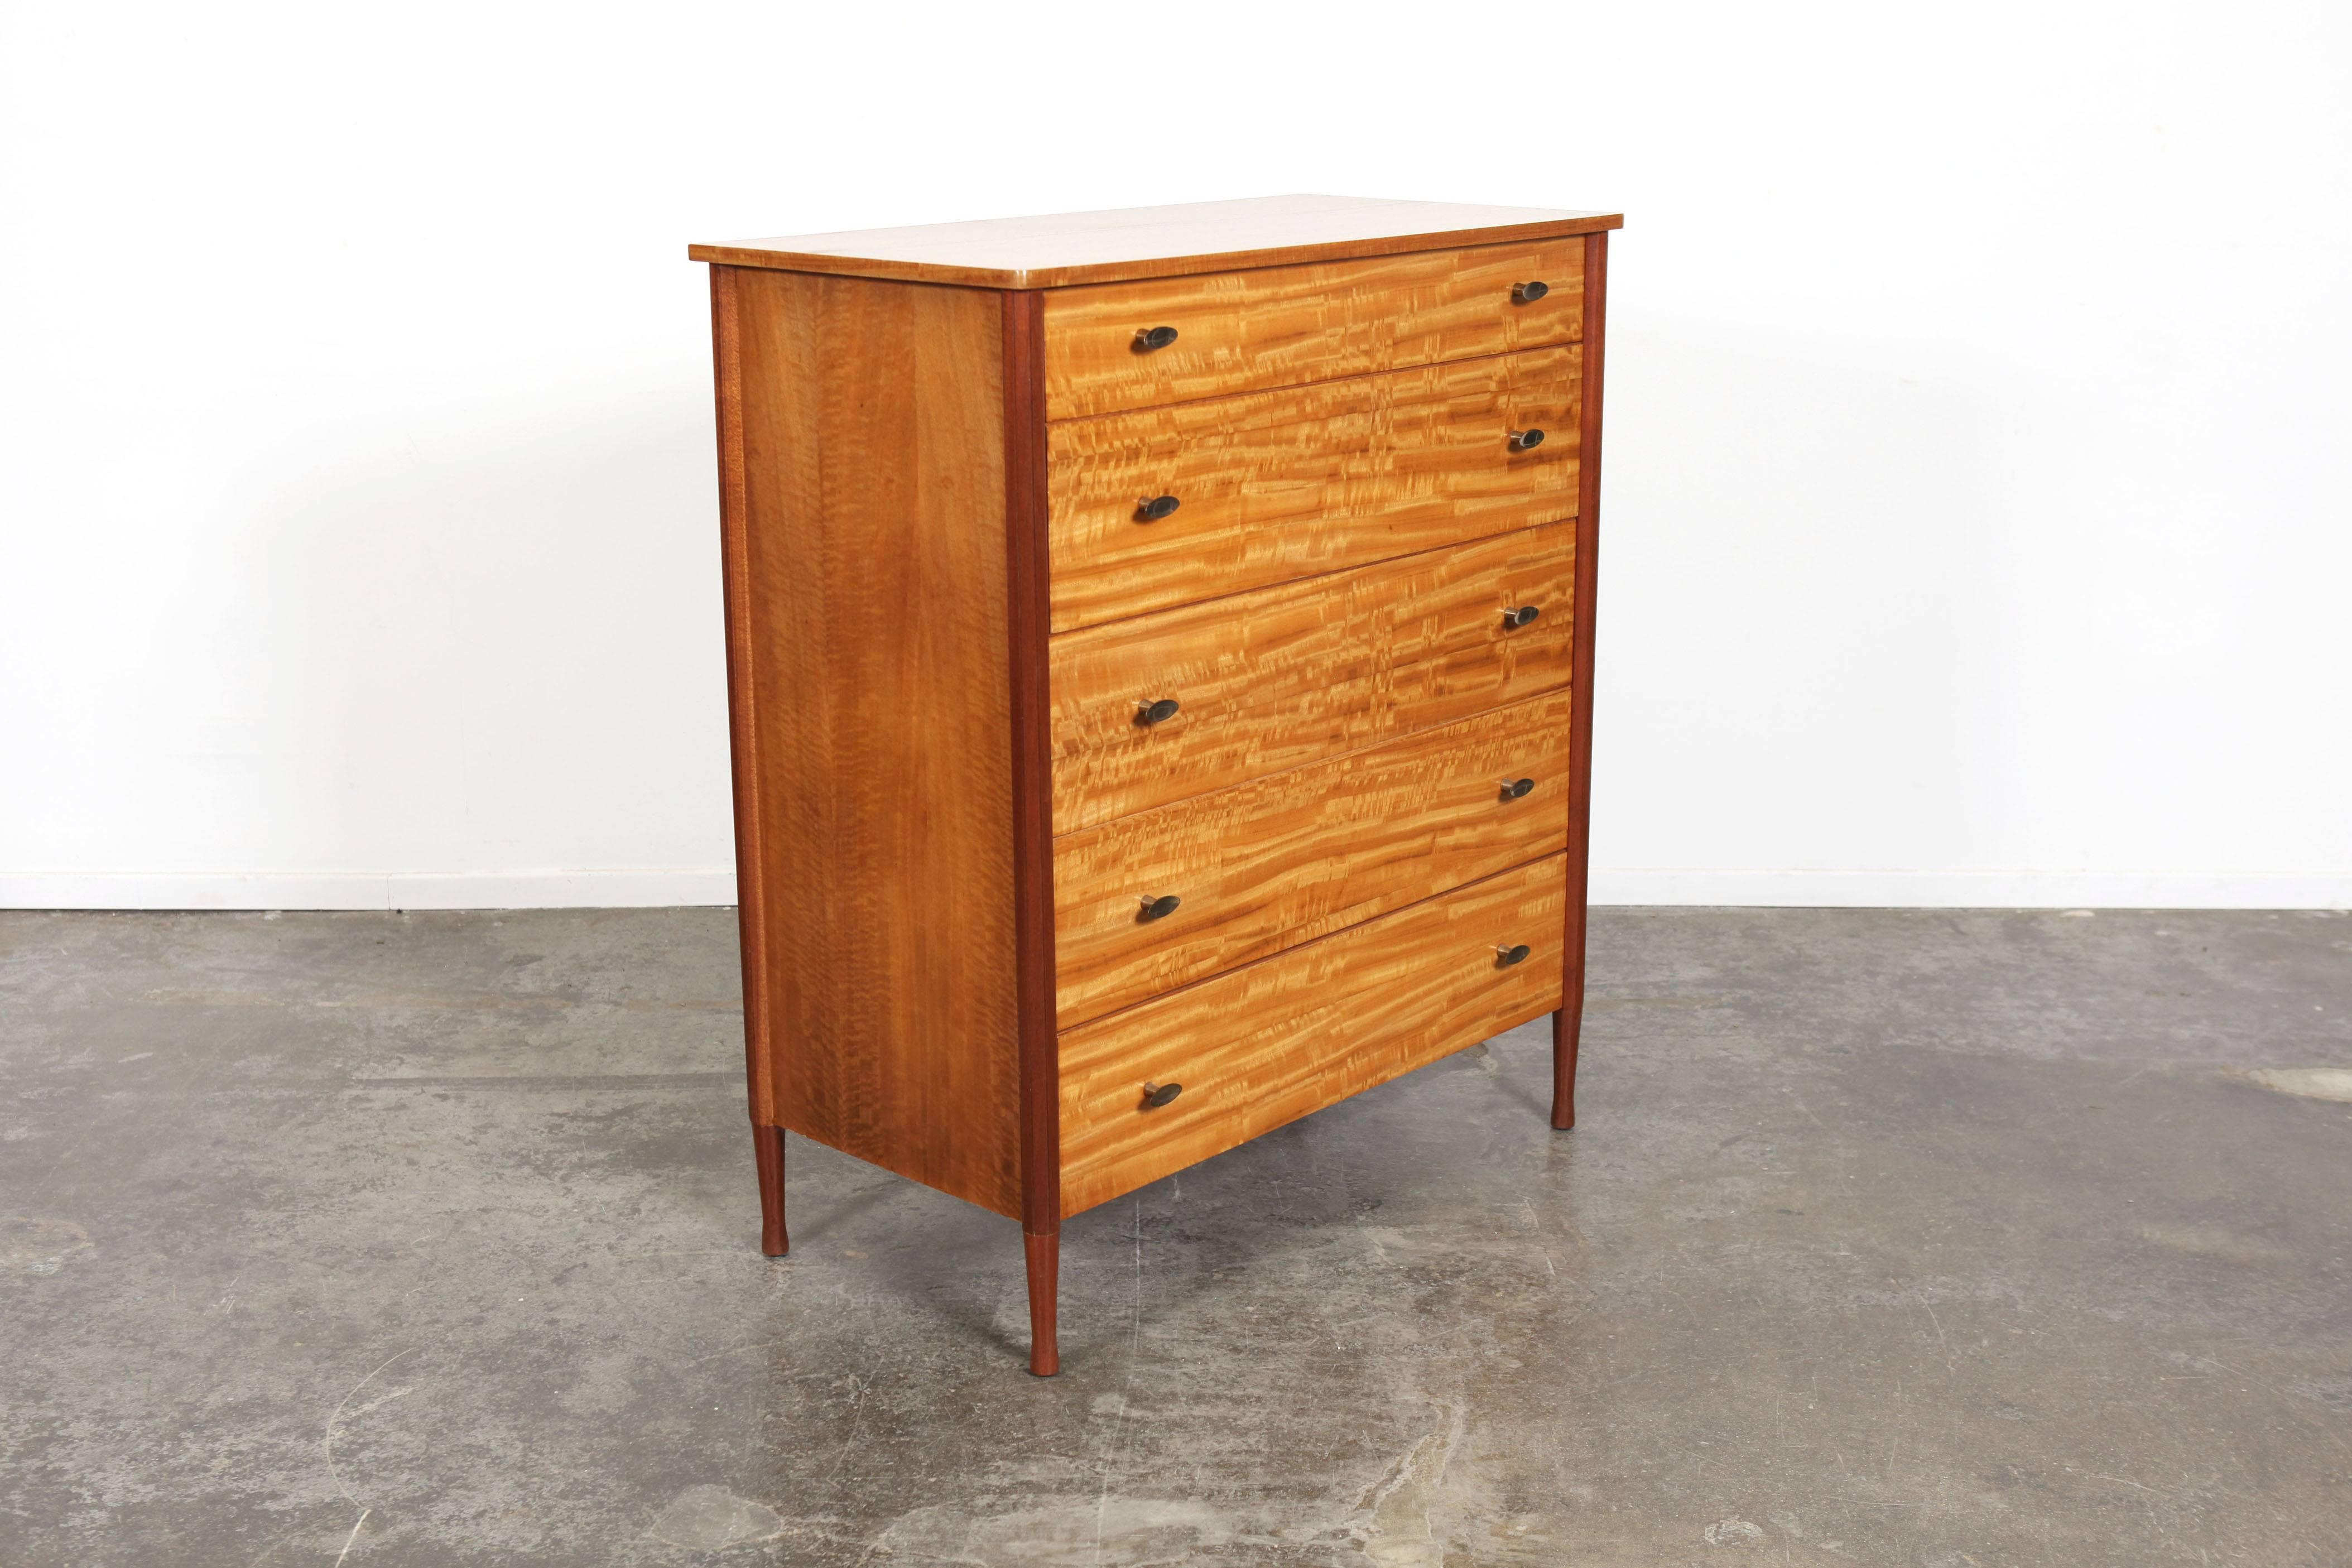 Beautiful mahogany Mid-Century Modern dresser or chest from England with sculptural brass pulls, produced by Wrighton Furniture.